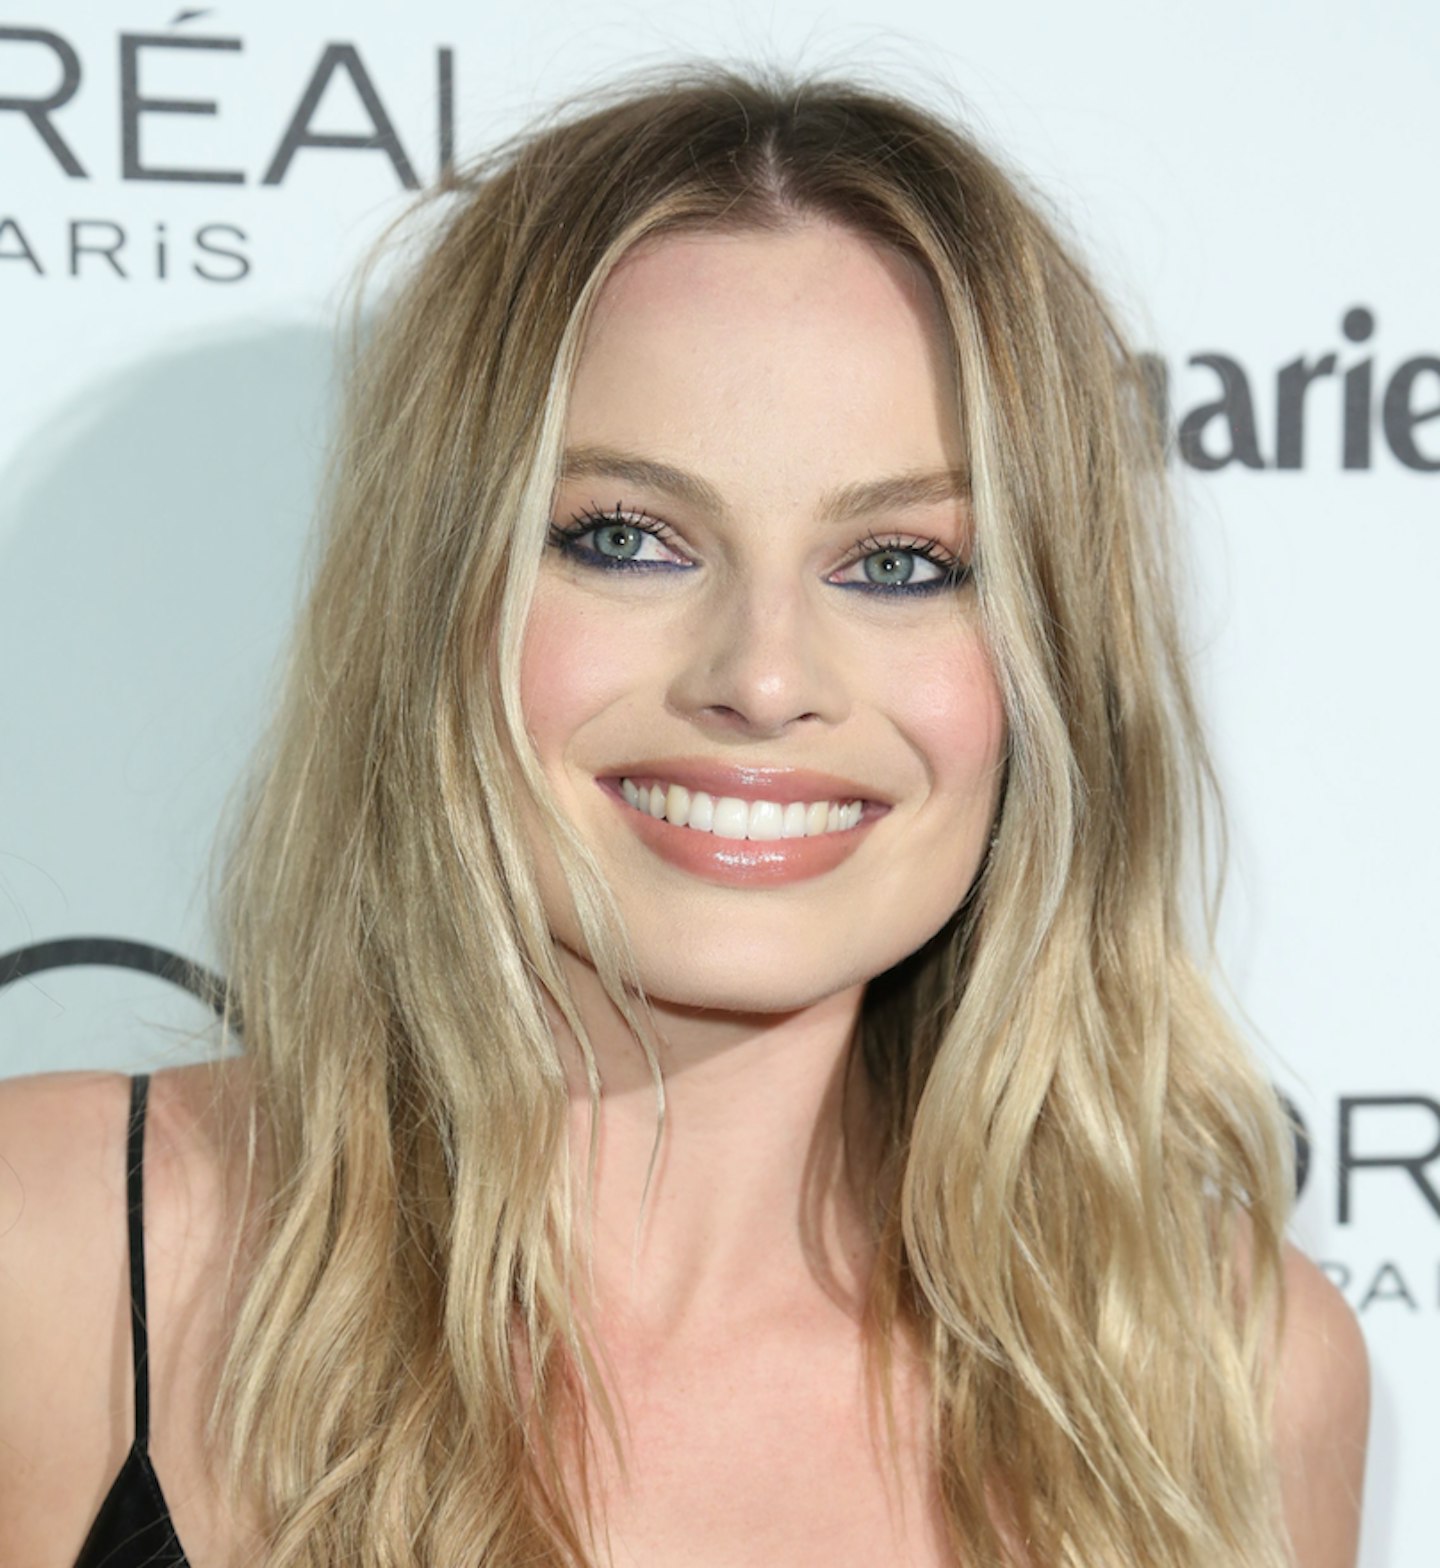 Get whiter teeth and a brighter smile like Margot Robbie